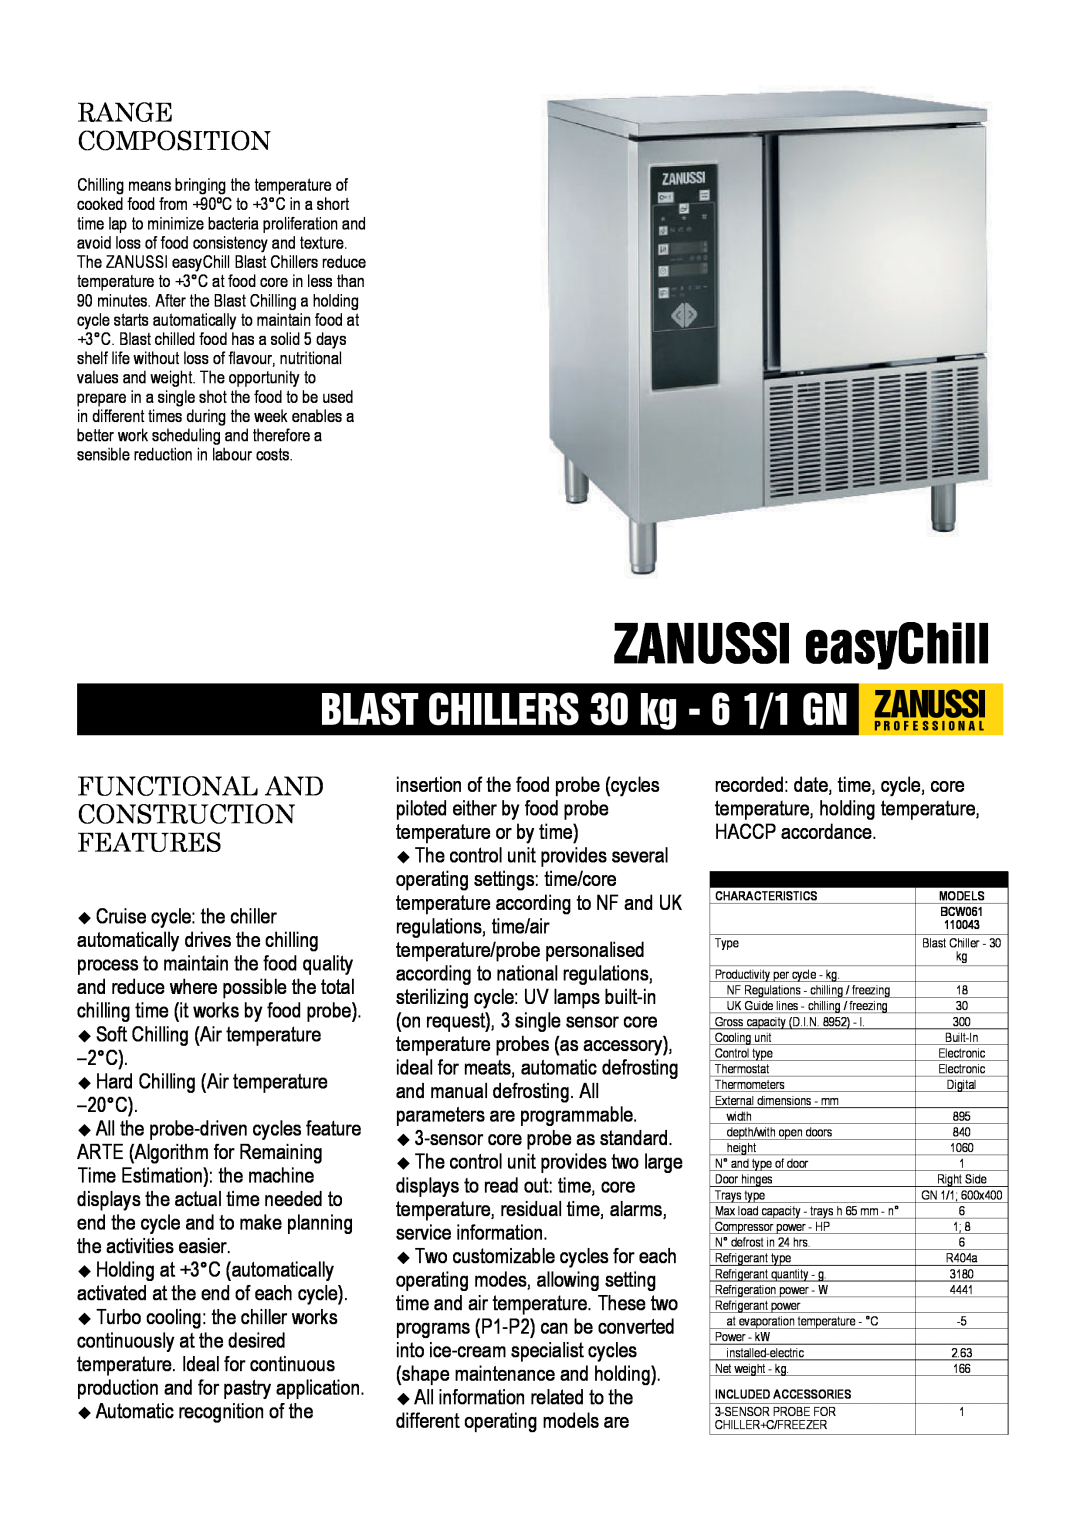 Electrolux 110043, BCW061 dimensions ZANUSSI easyChill, BLAST CHILLERS 30 kg - 6 1/1 GN ZANUSSIP R O F E S S I O N A L 